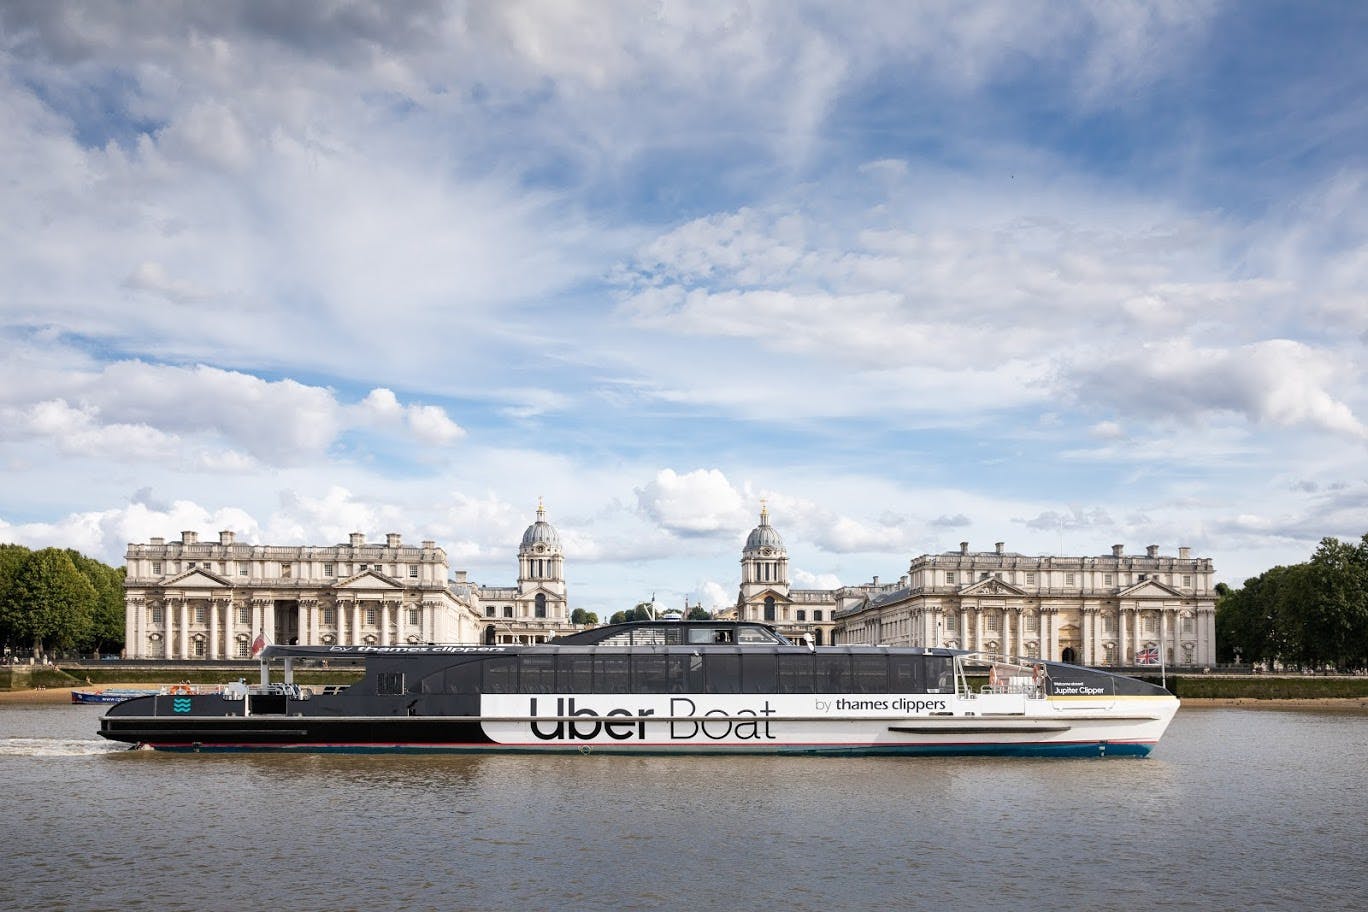 Uber Boat by Thames Clippers - River Roamer hop-on-hop-off biglietti giornalieri